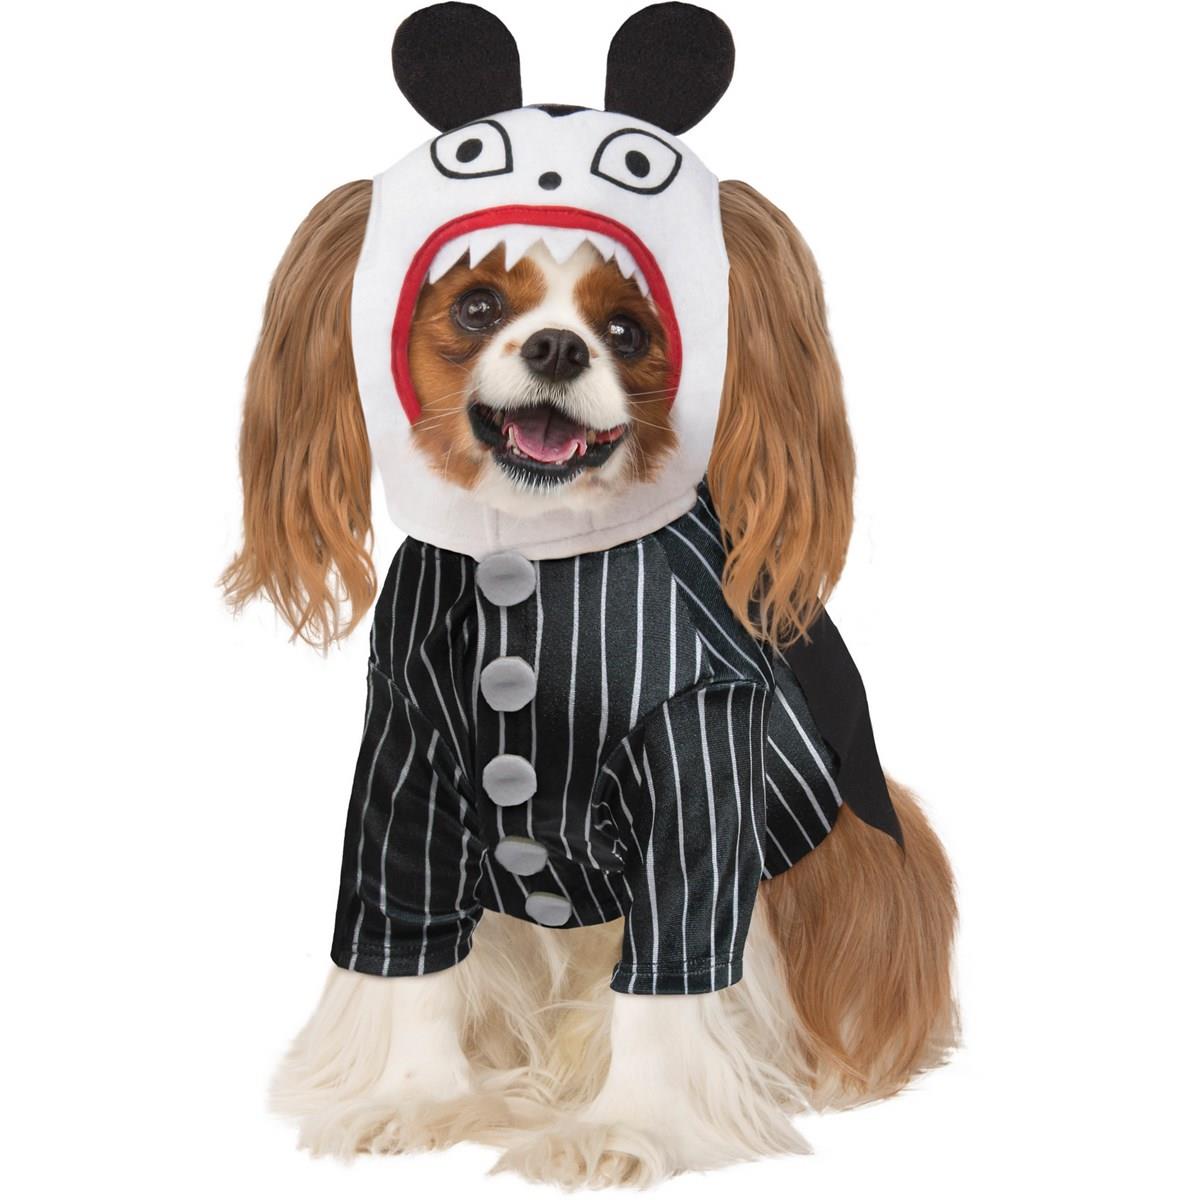 283948 Scary Teddy Pet Costume, Extra Large 28